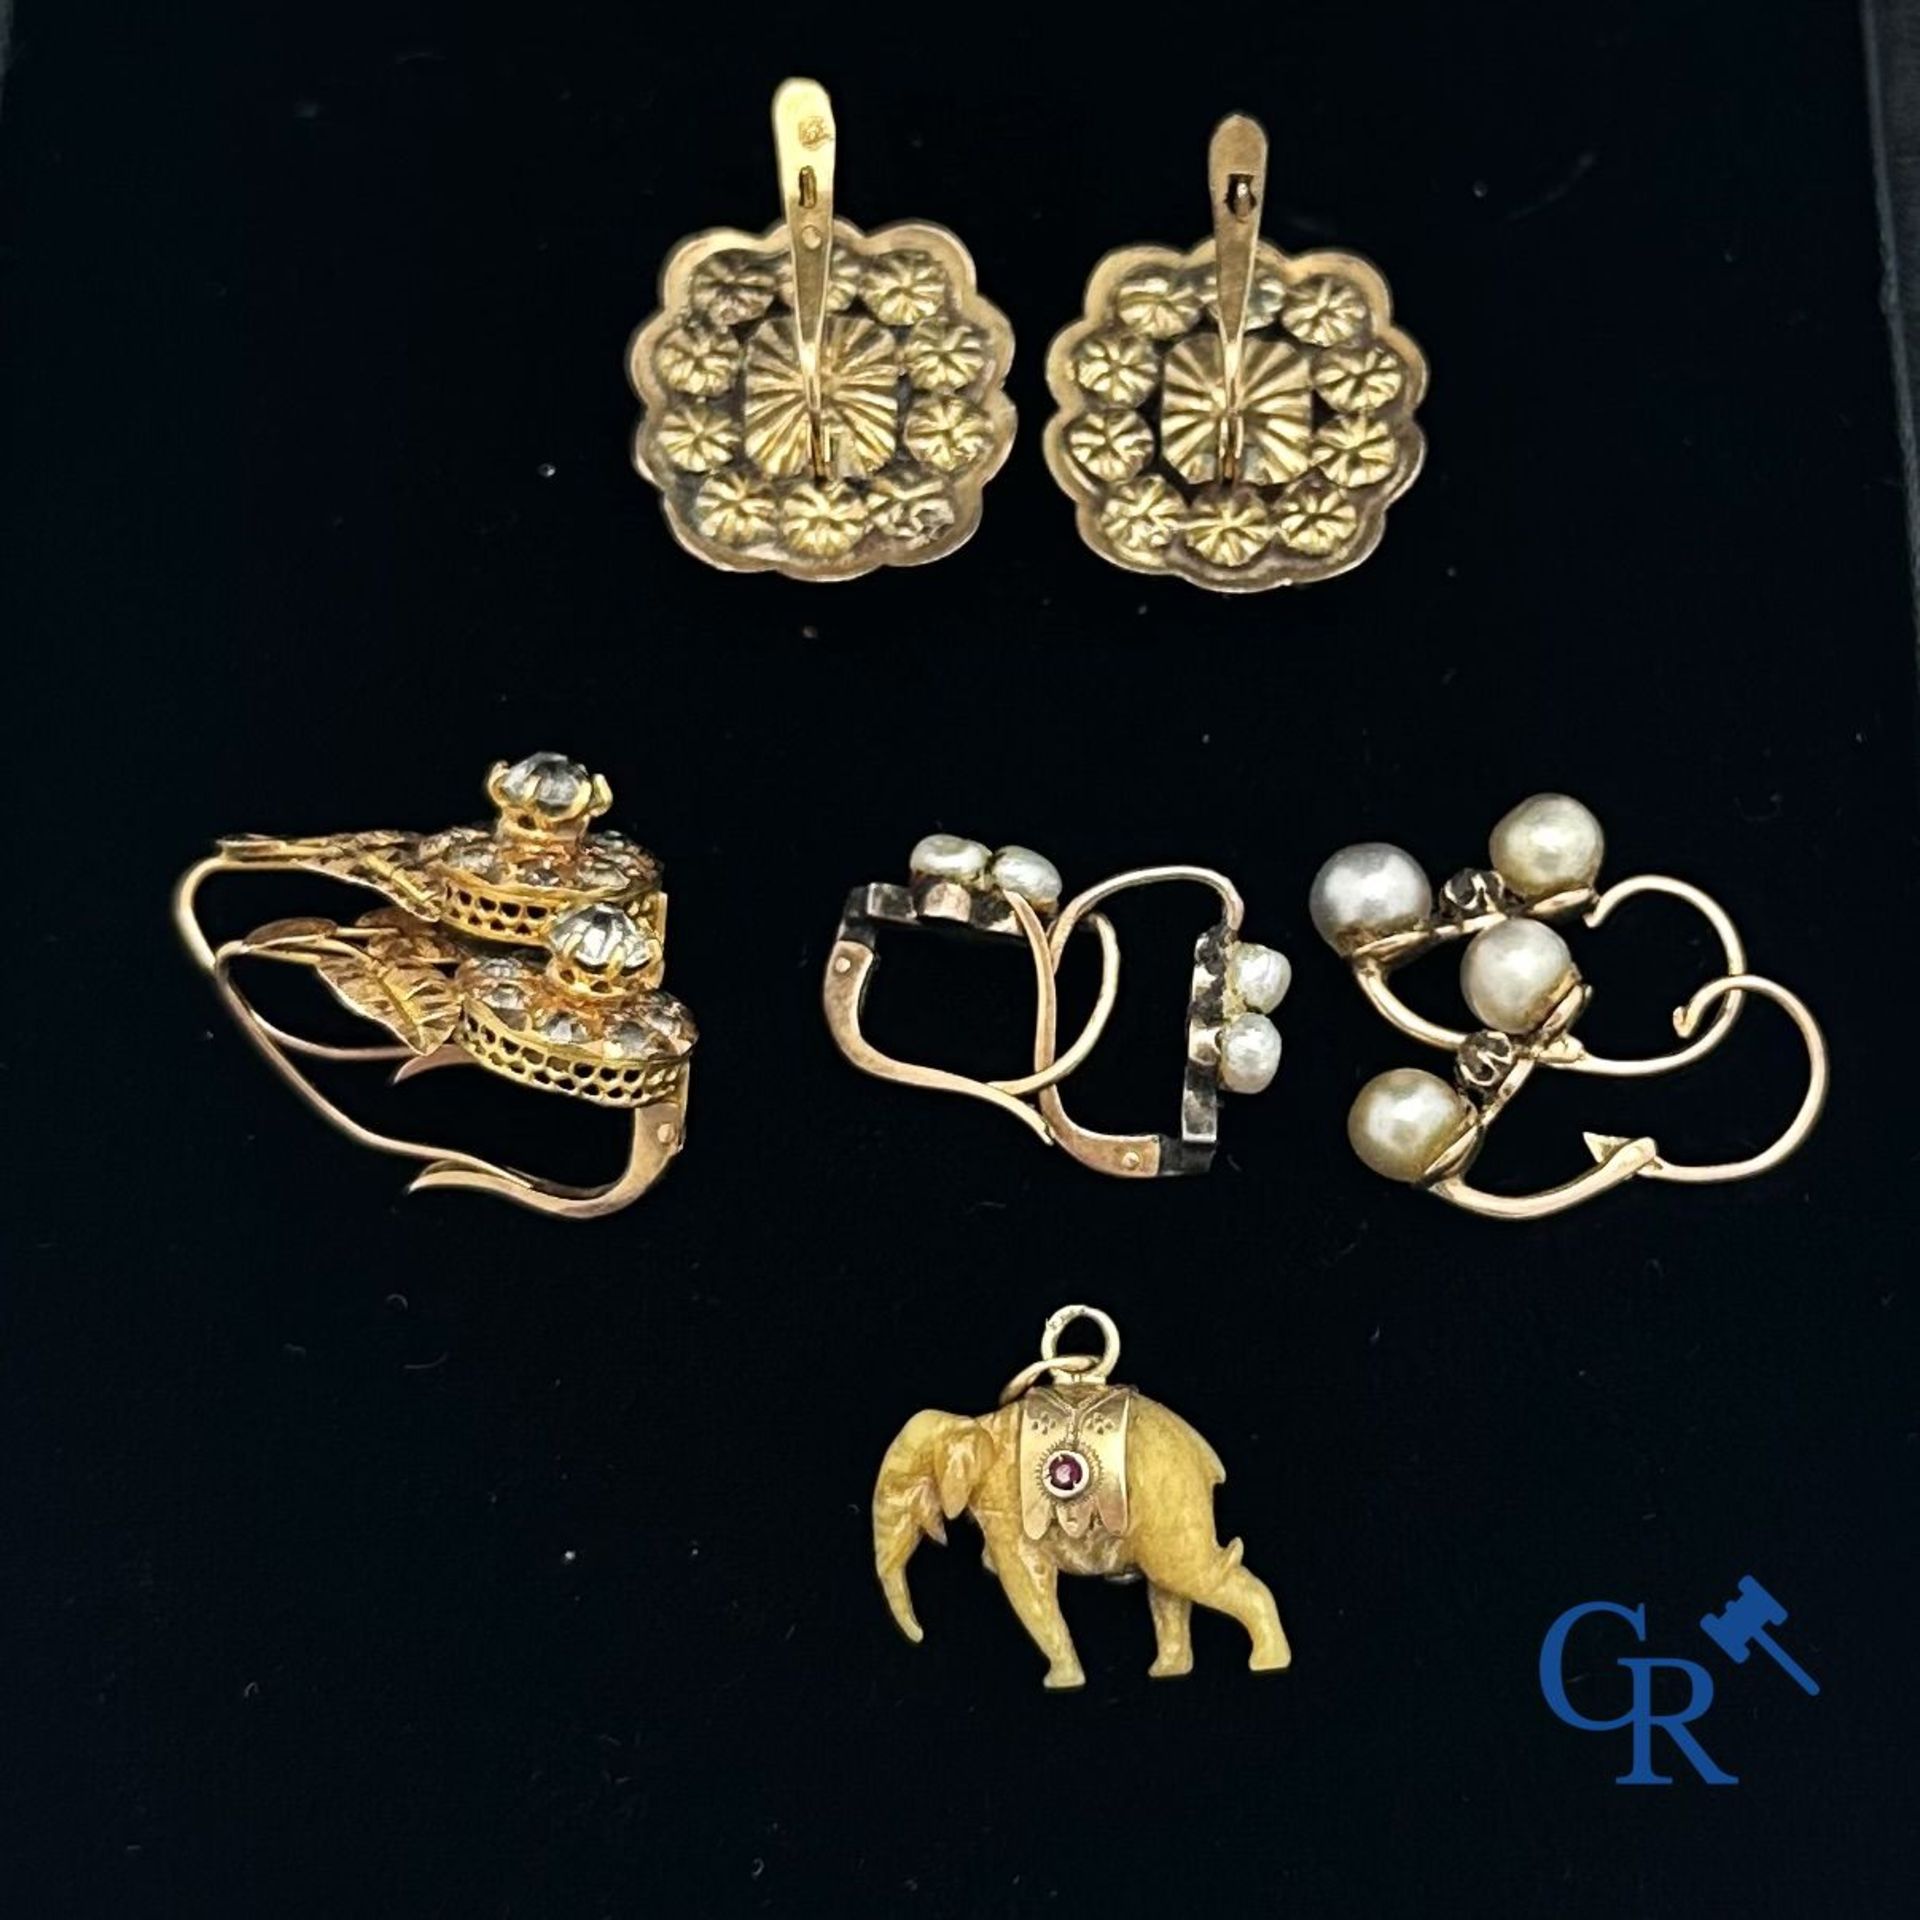 Jewellery: Lot of 2 pairs of earrings 18K, 2 pairs of small earrings 18K and a charm. - Bild 2 aus 3